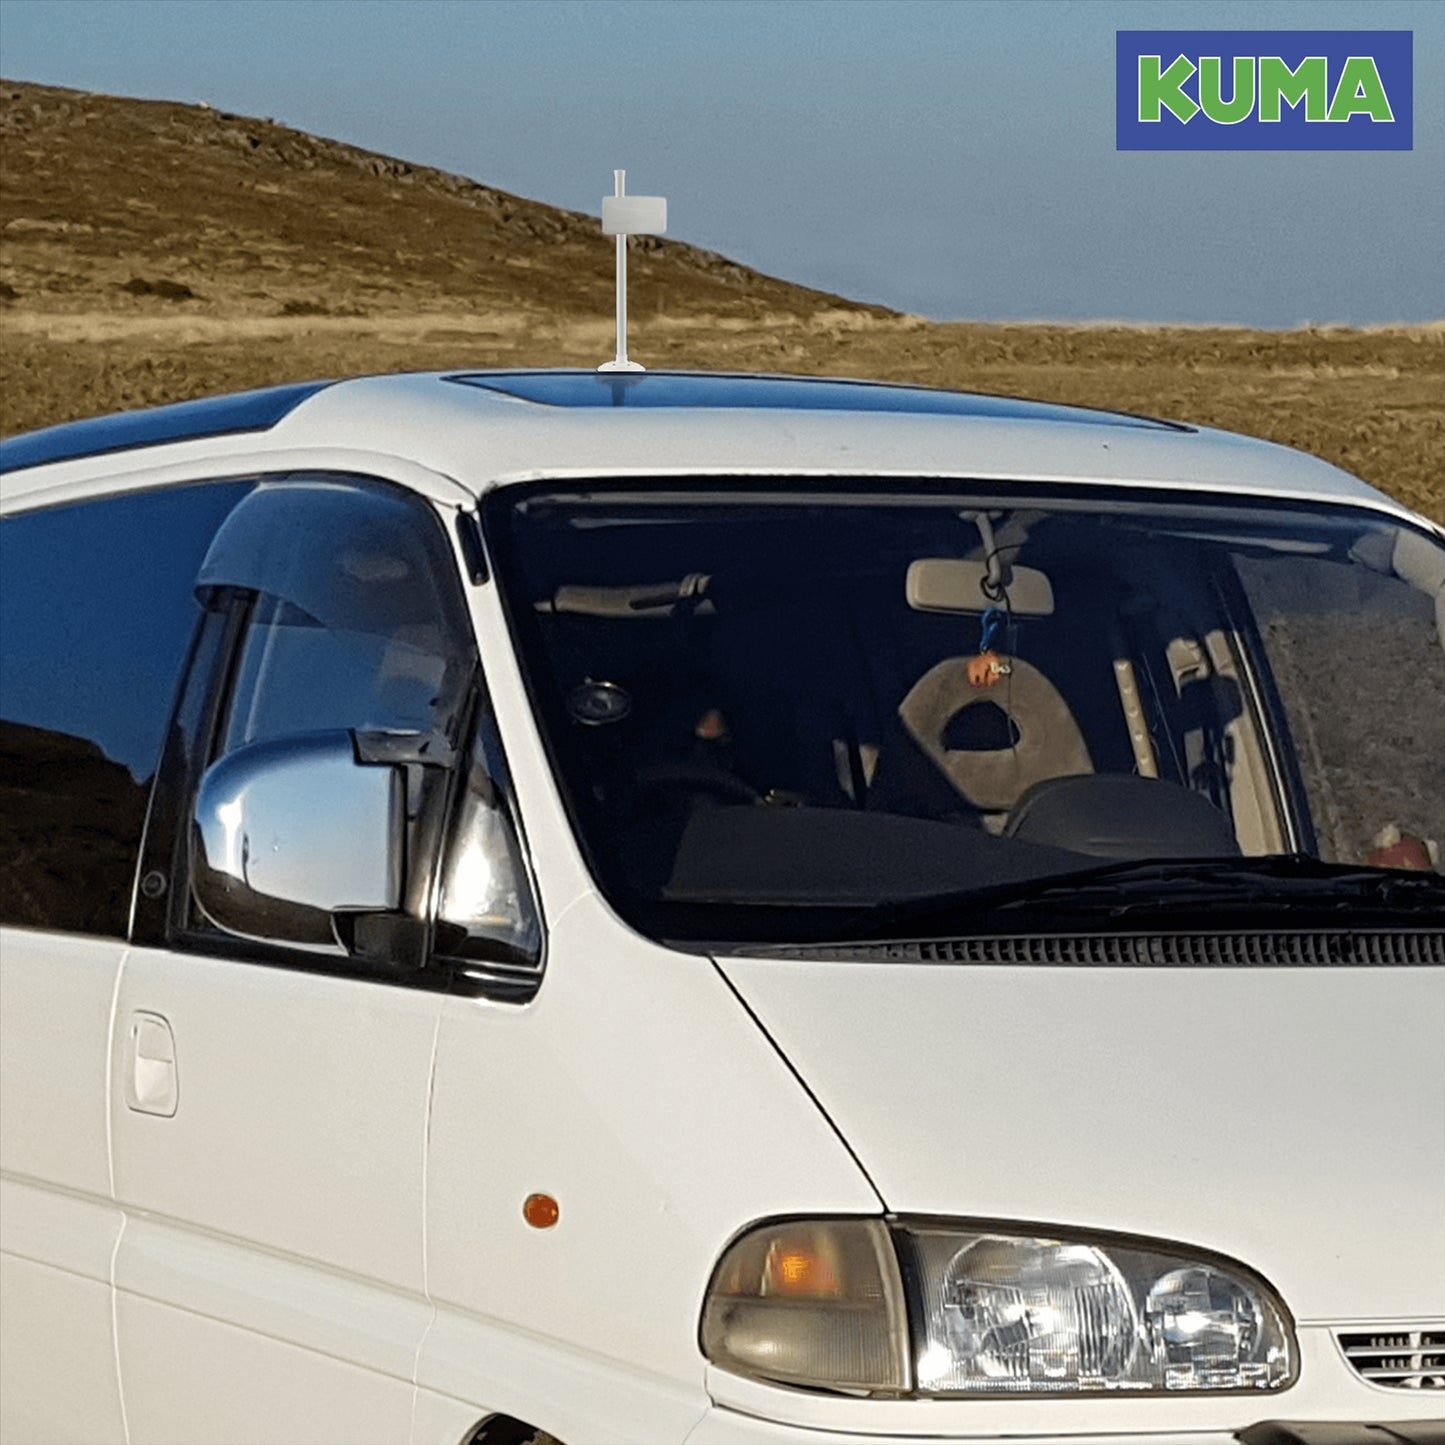 KUMA Magnetic Pole Mount for TV Aerial Antenna - 300mm Magnet Mounting Loft Mast use in Caravan Motorhome Truck Boat - Also be use as Flag Display Sign Poster Paper Stand - Indoor or Outdoor - White